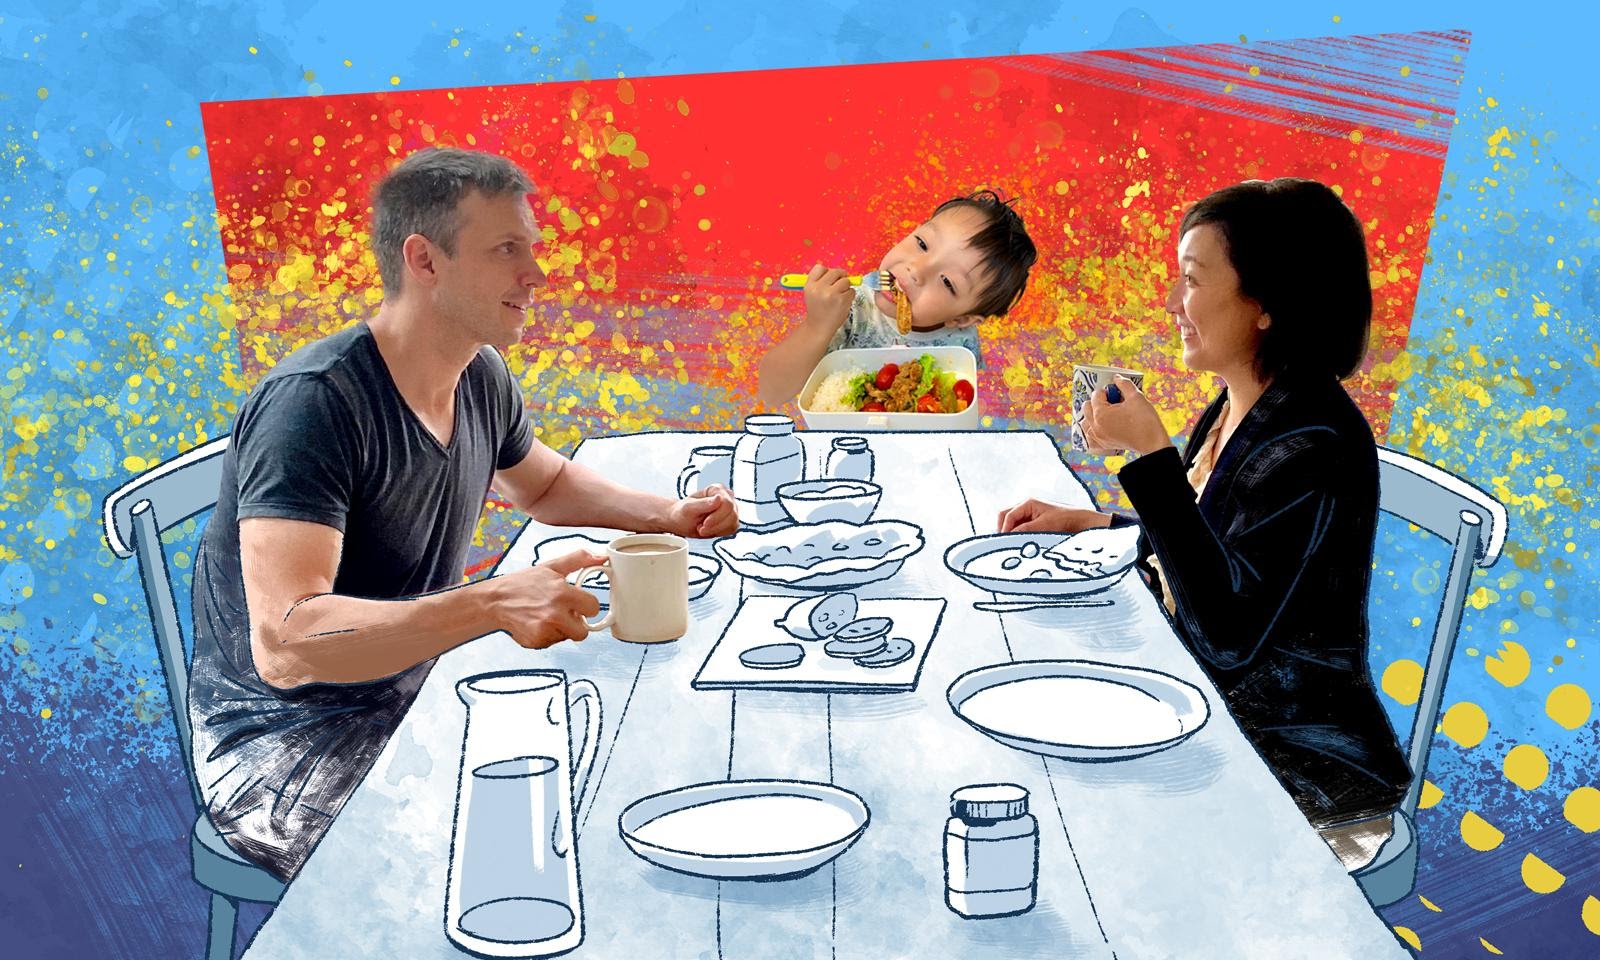 Two people and their toddler eat at a table. The table is an illustration.